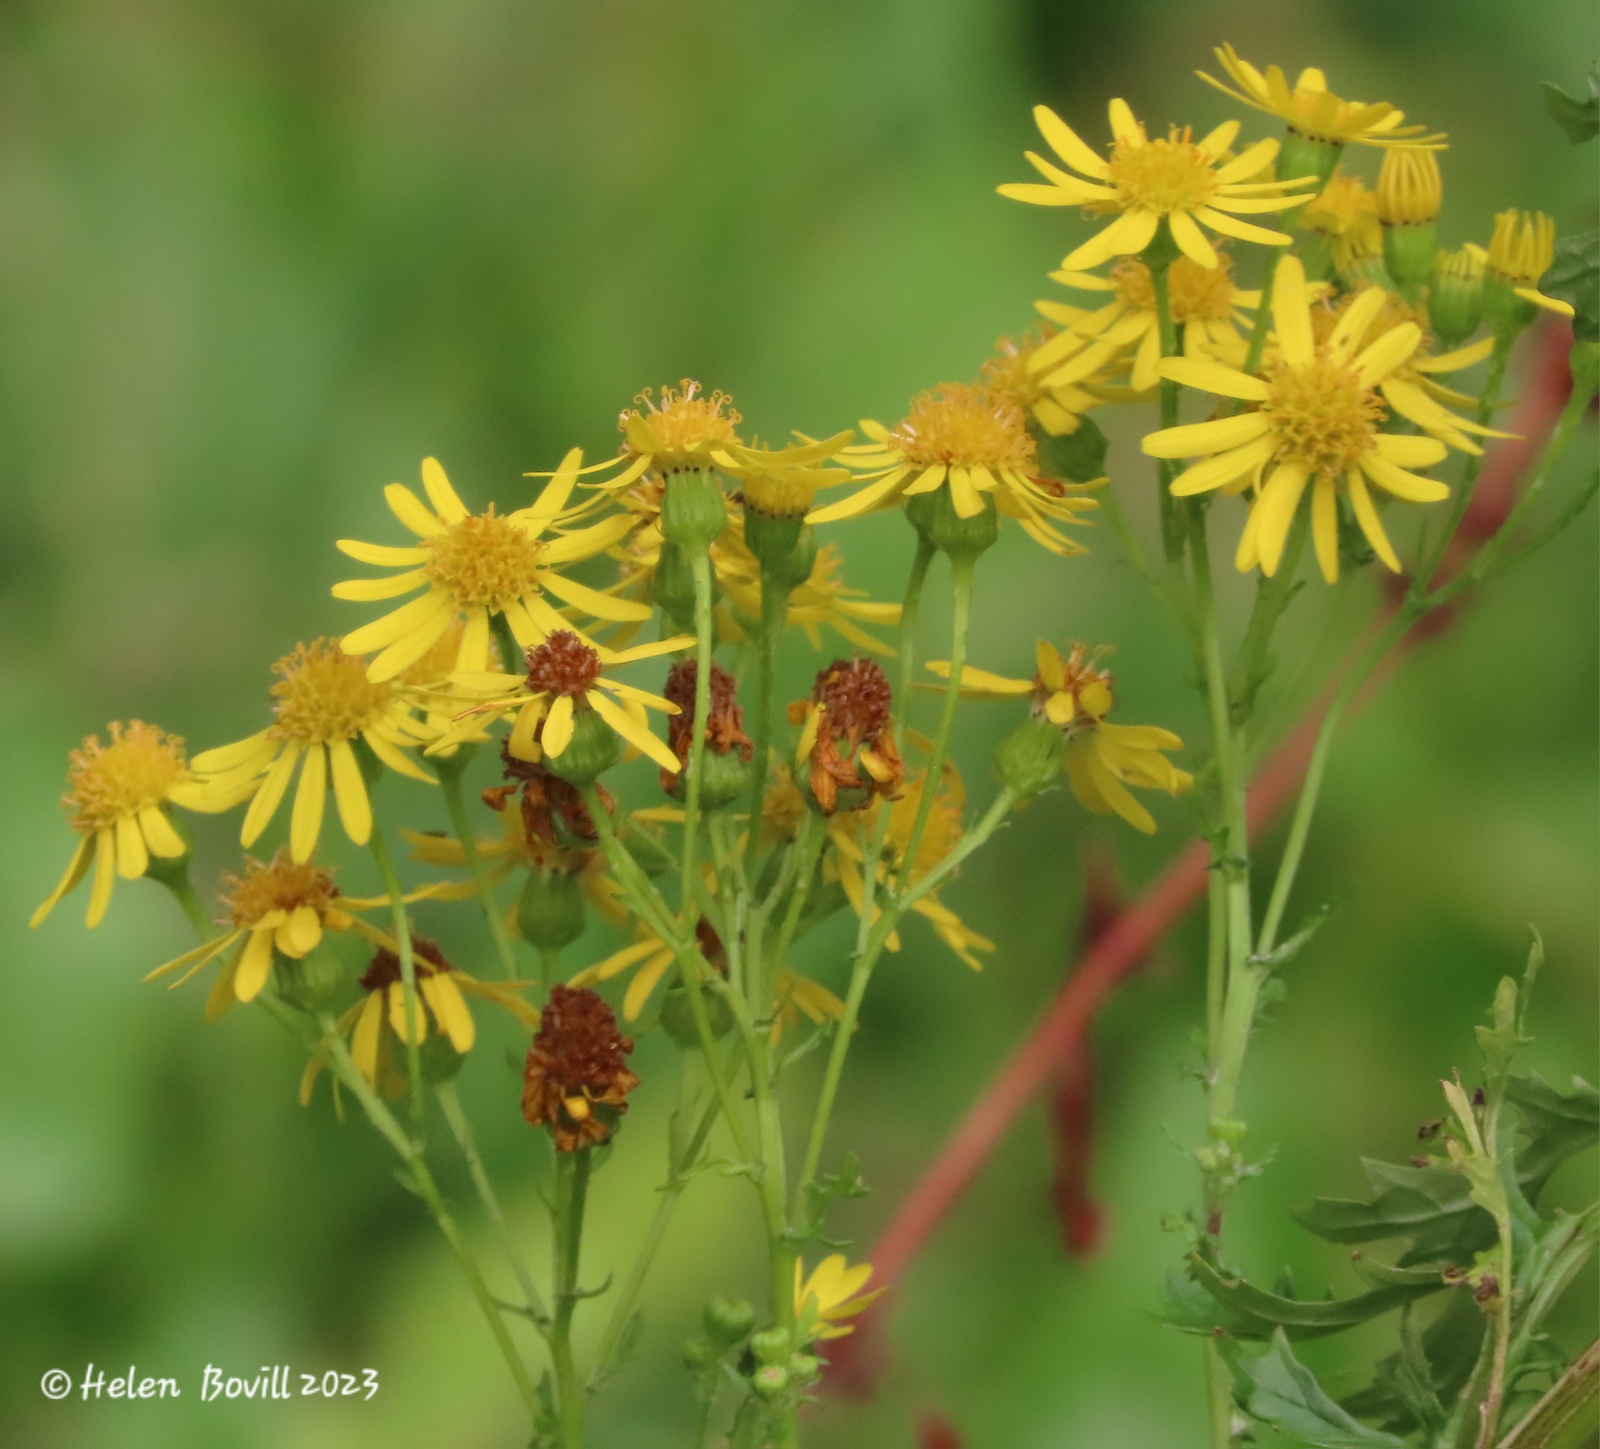 The yellow flowers of the Ragwort, on the grass verge alongside the cemetery